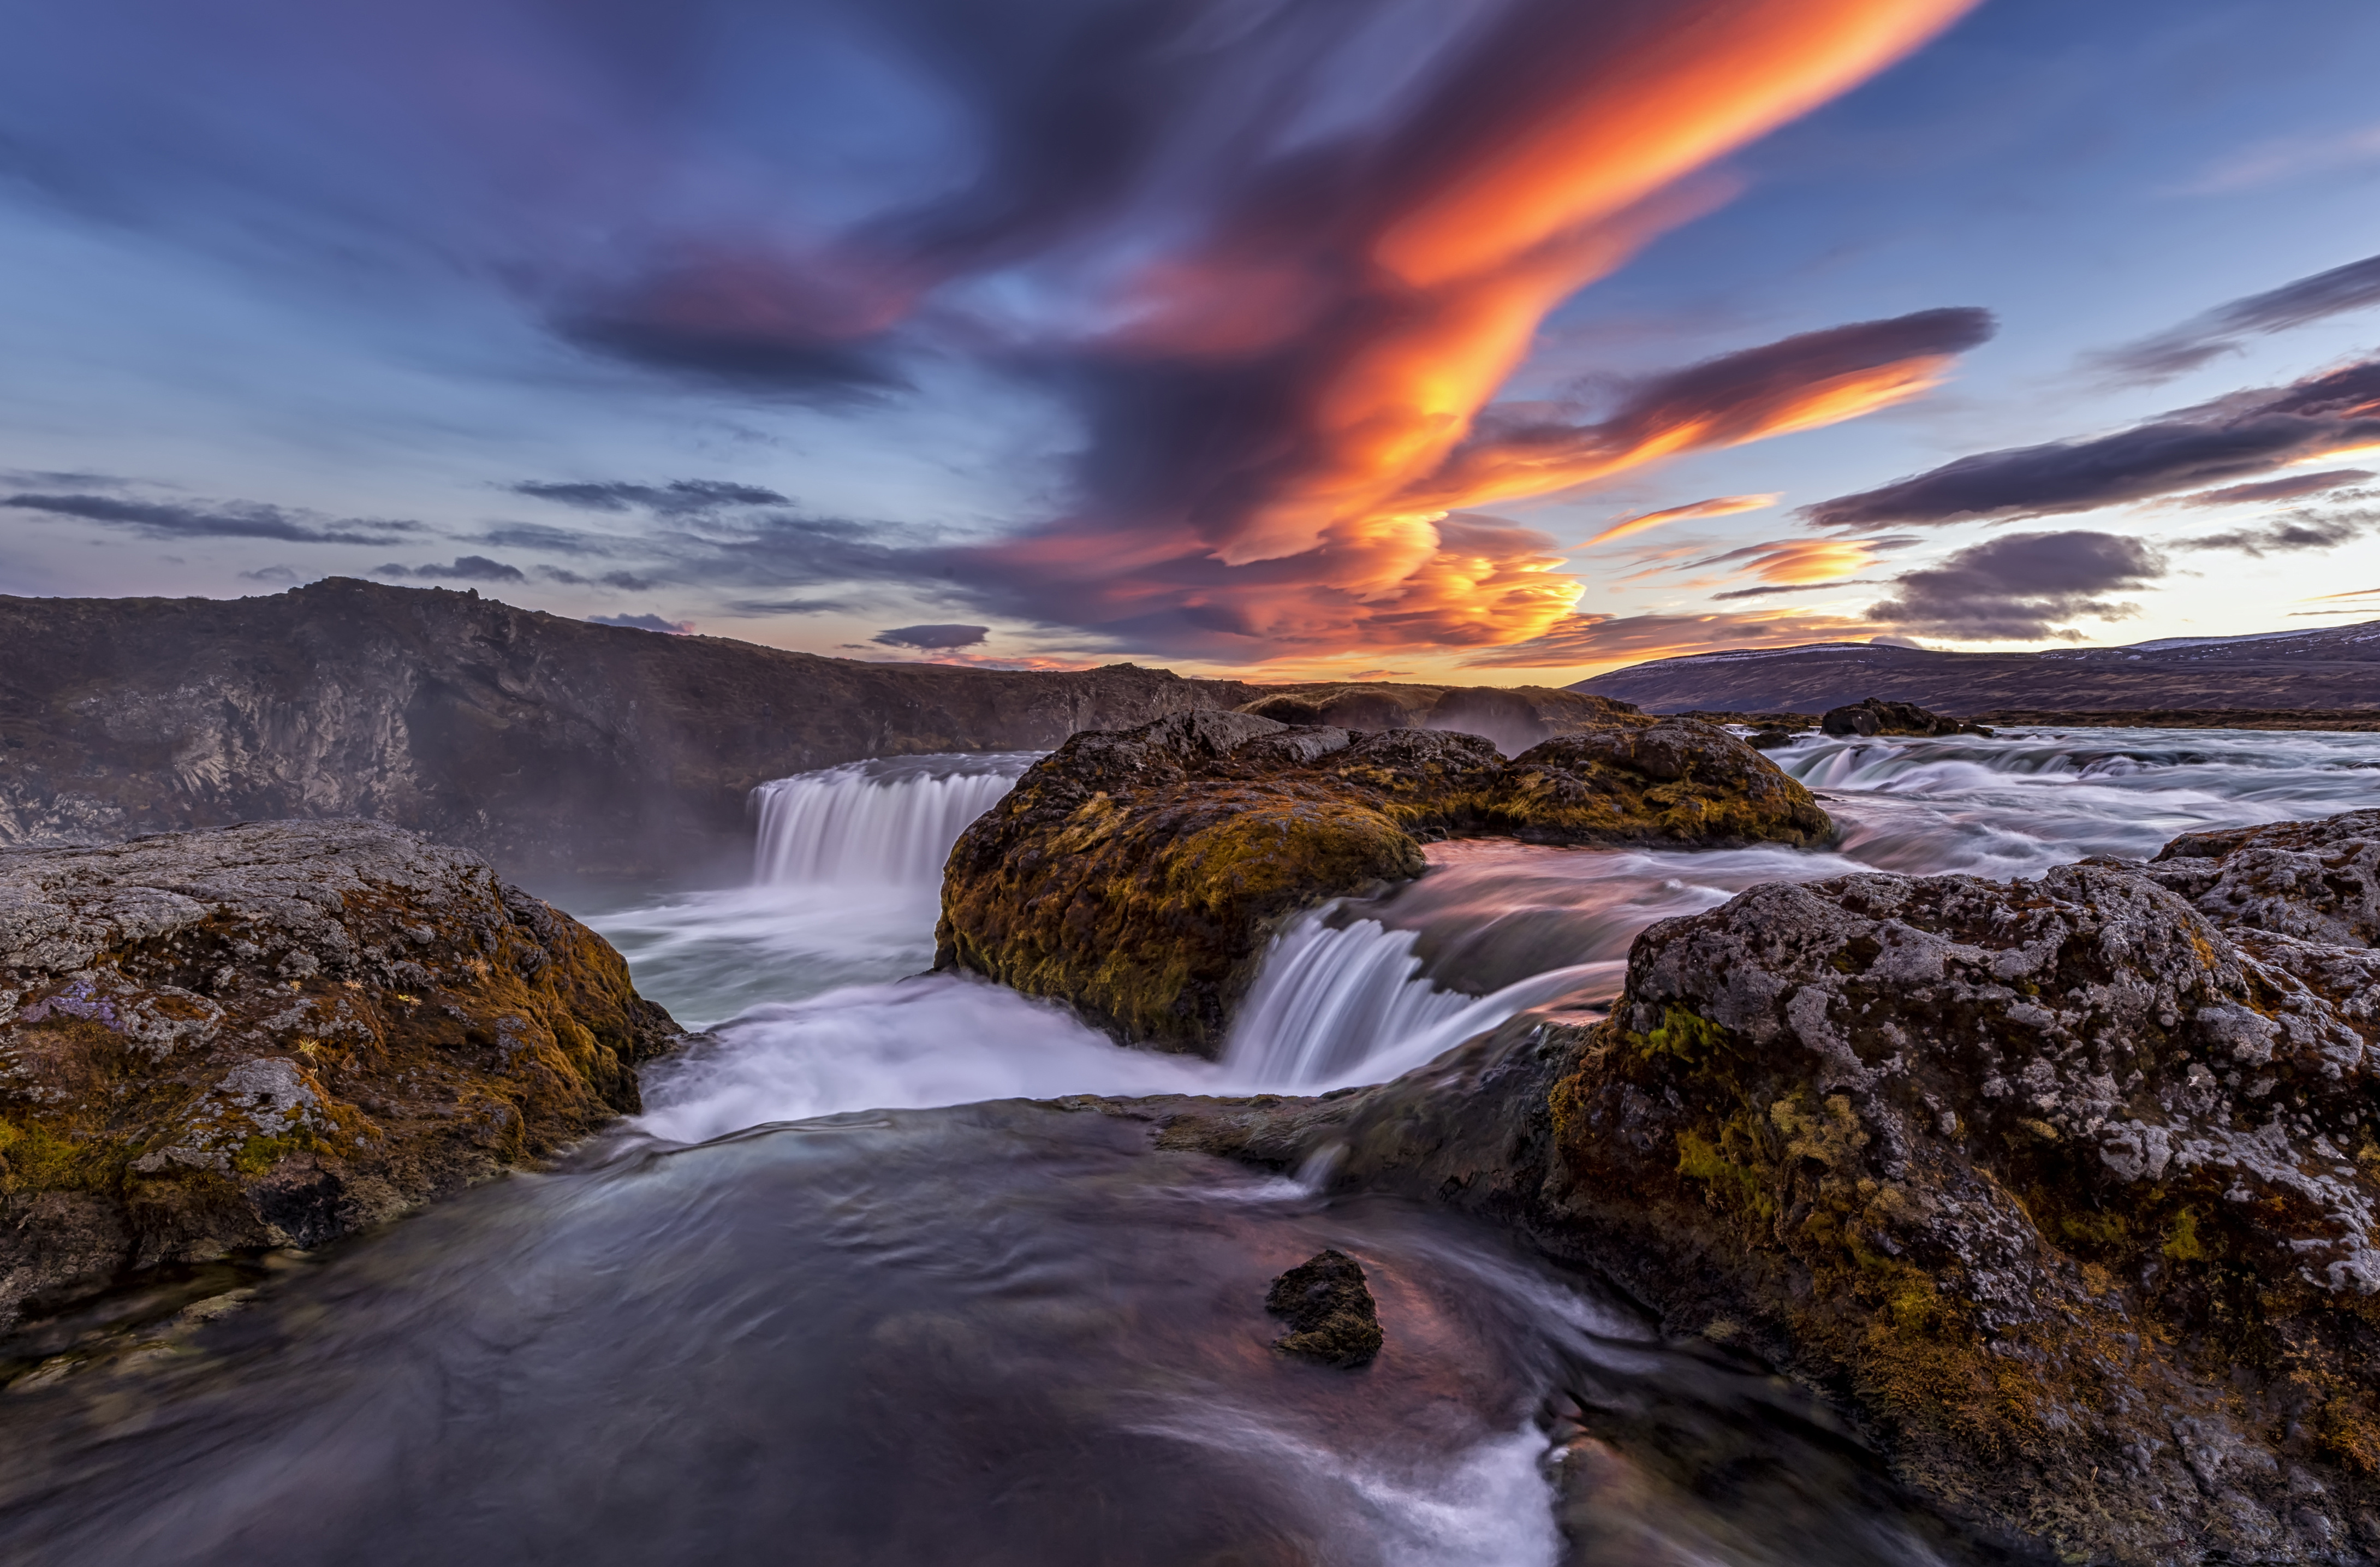 pictures of sunsets and waterfalls